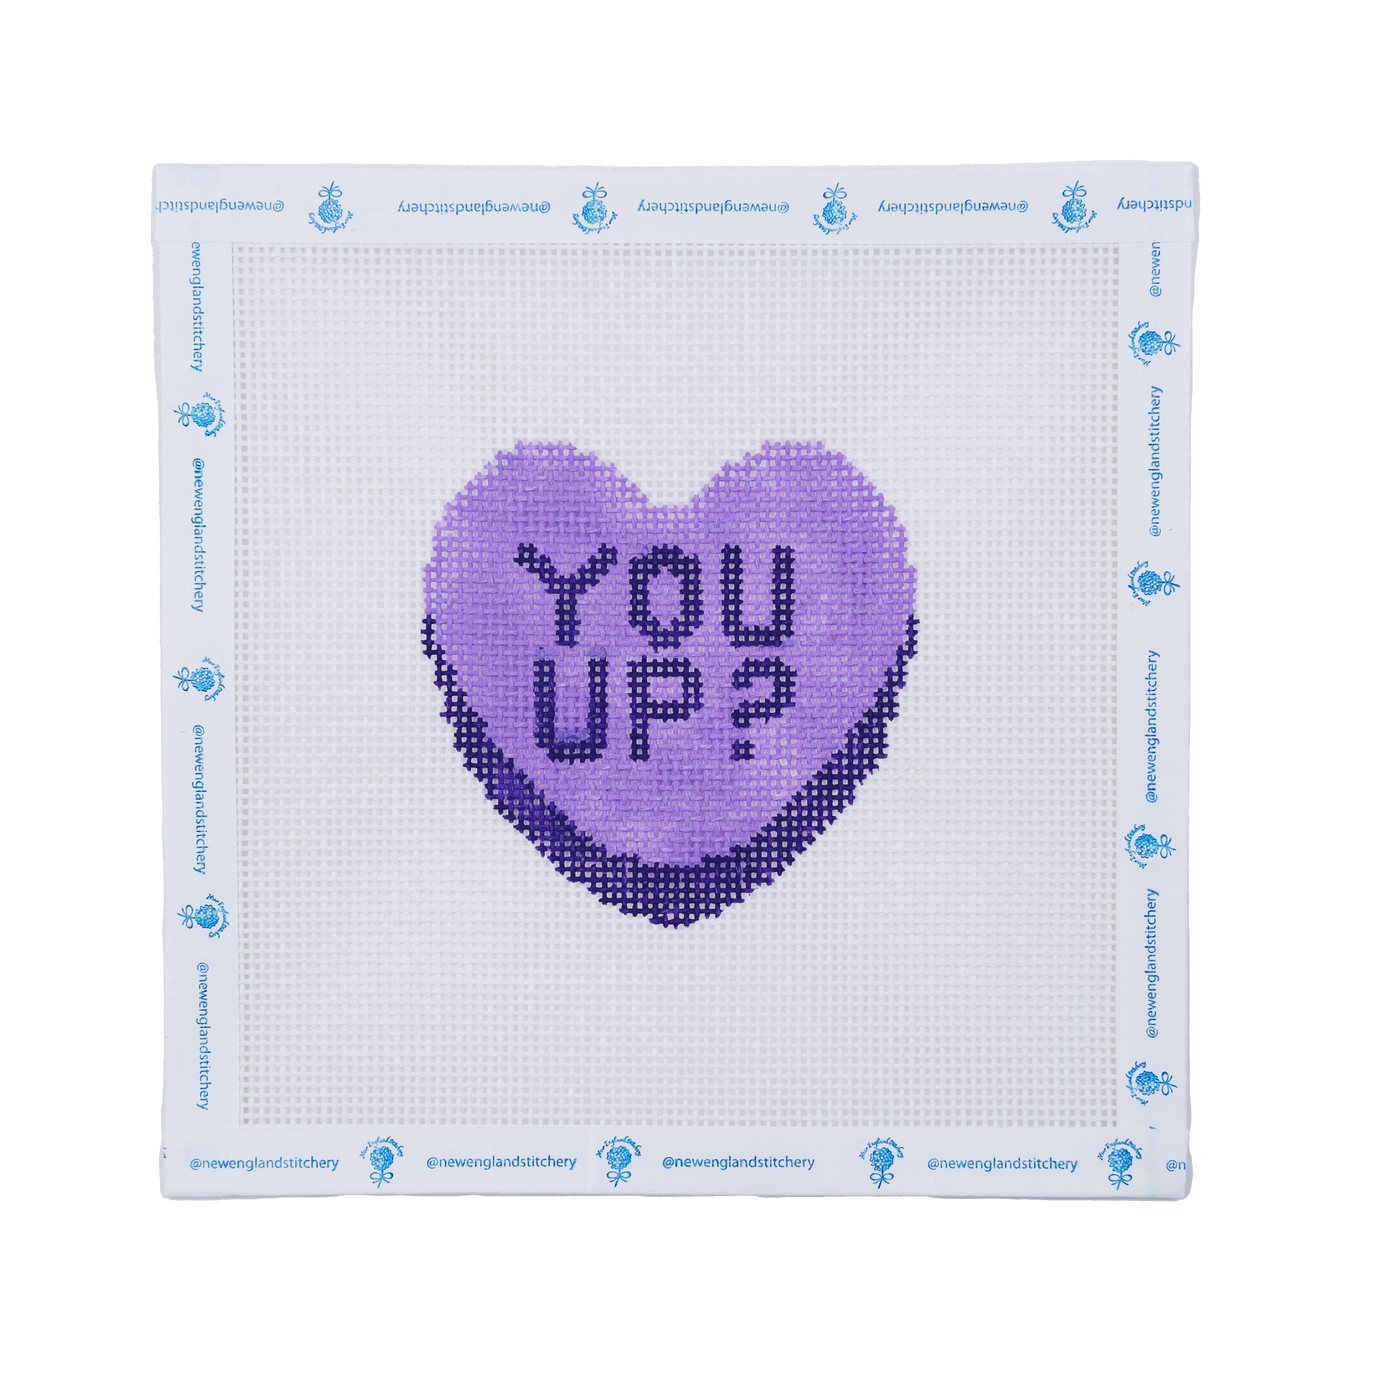 You Up? Candy Heart